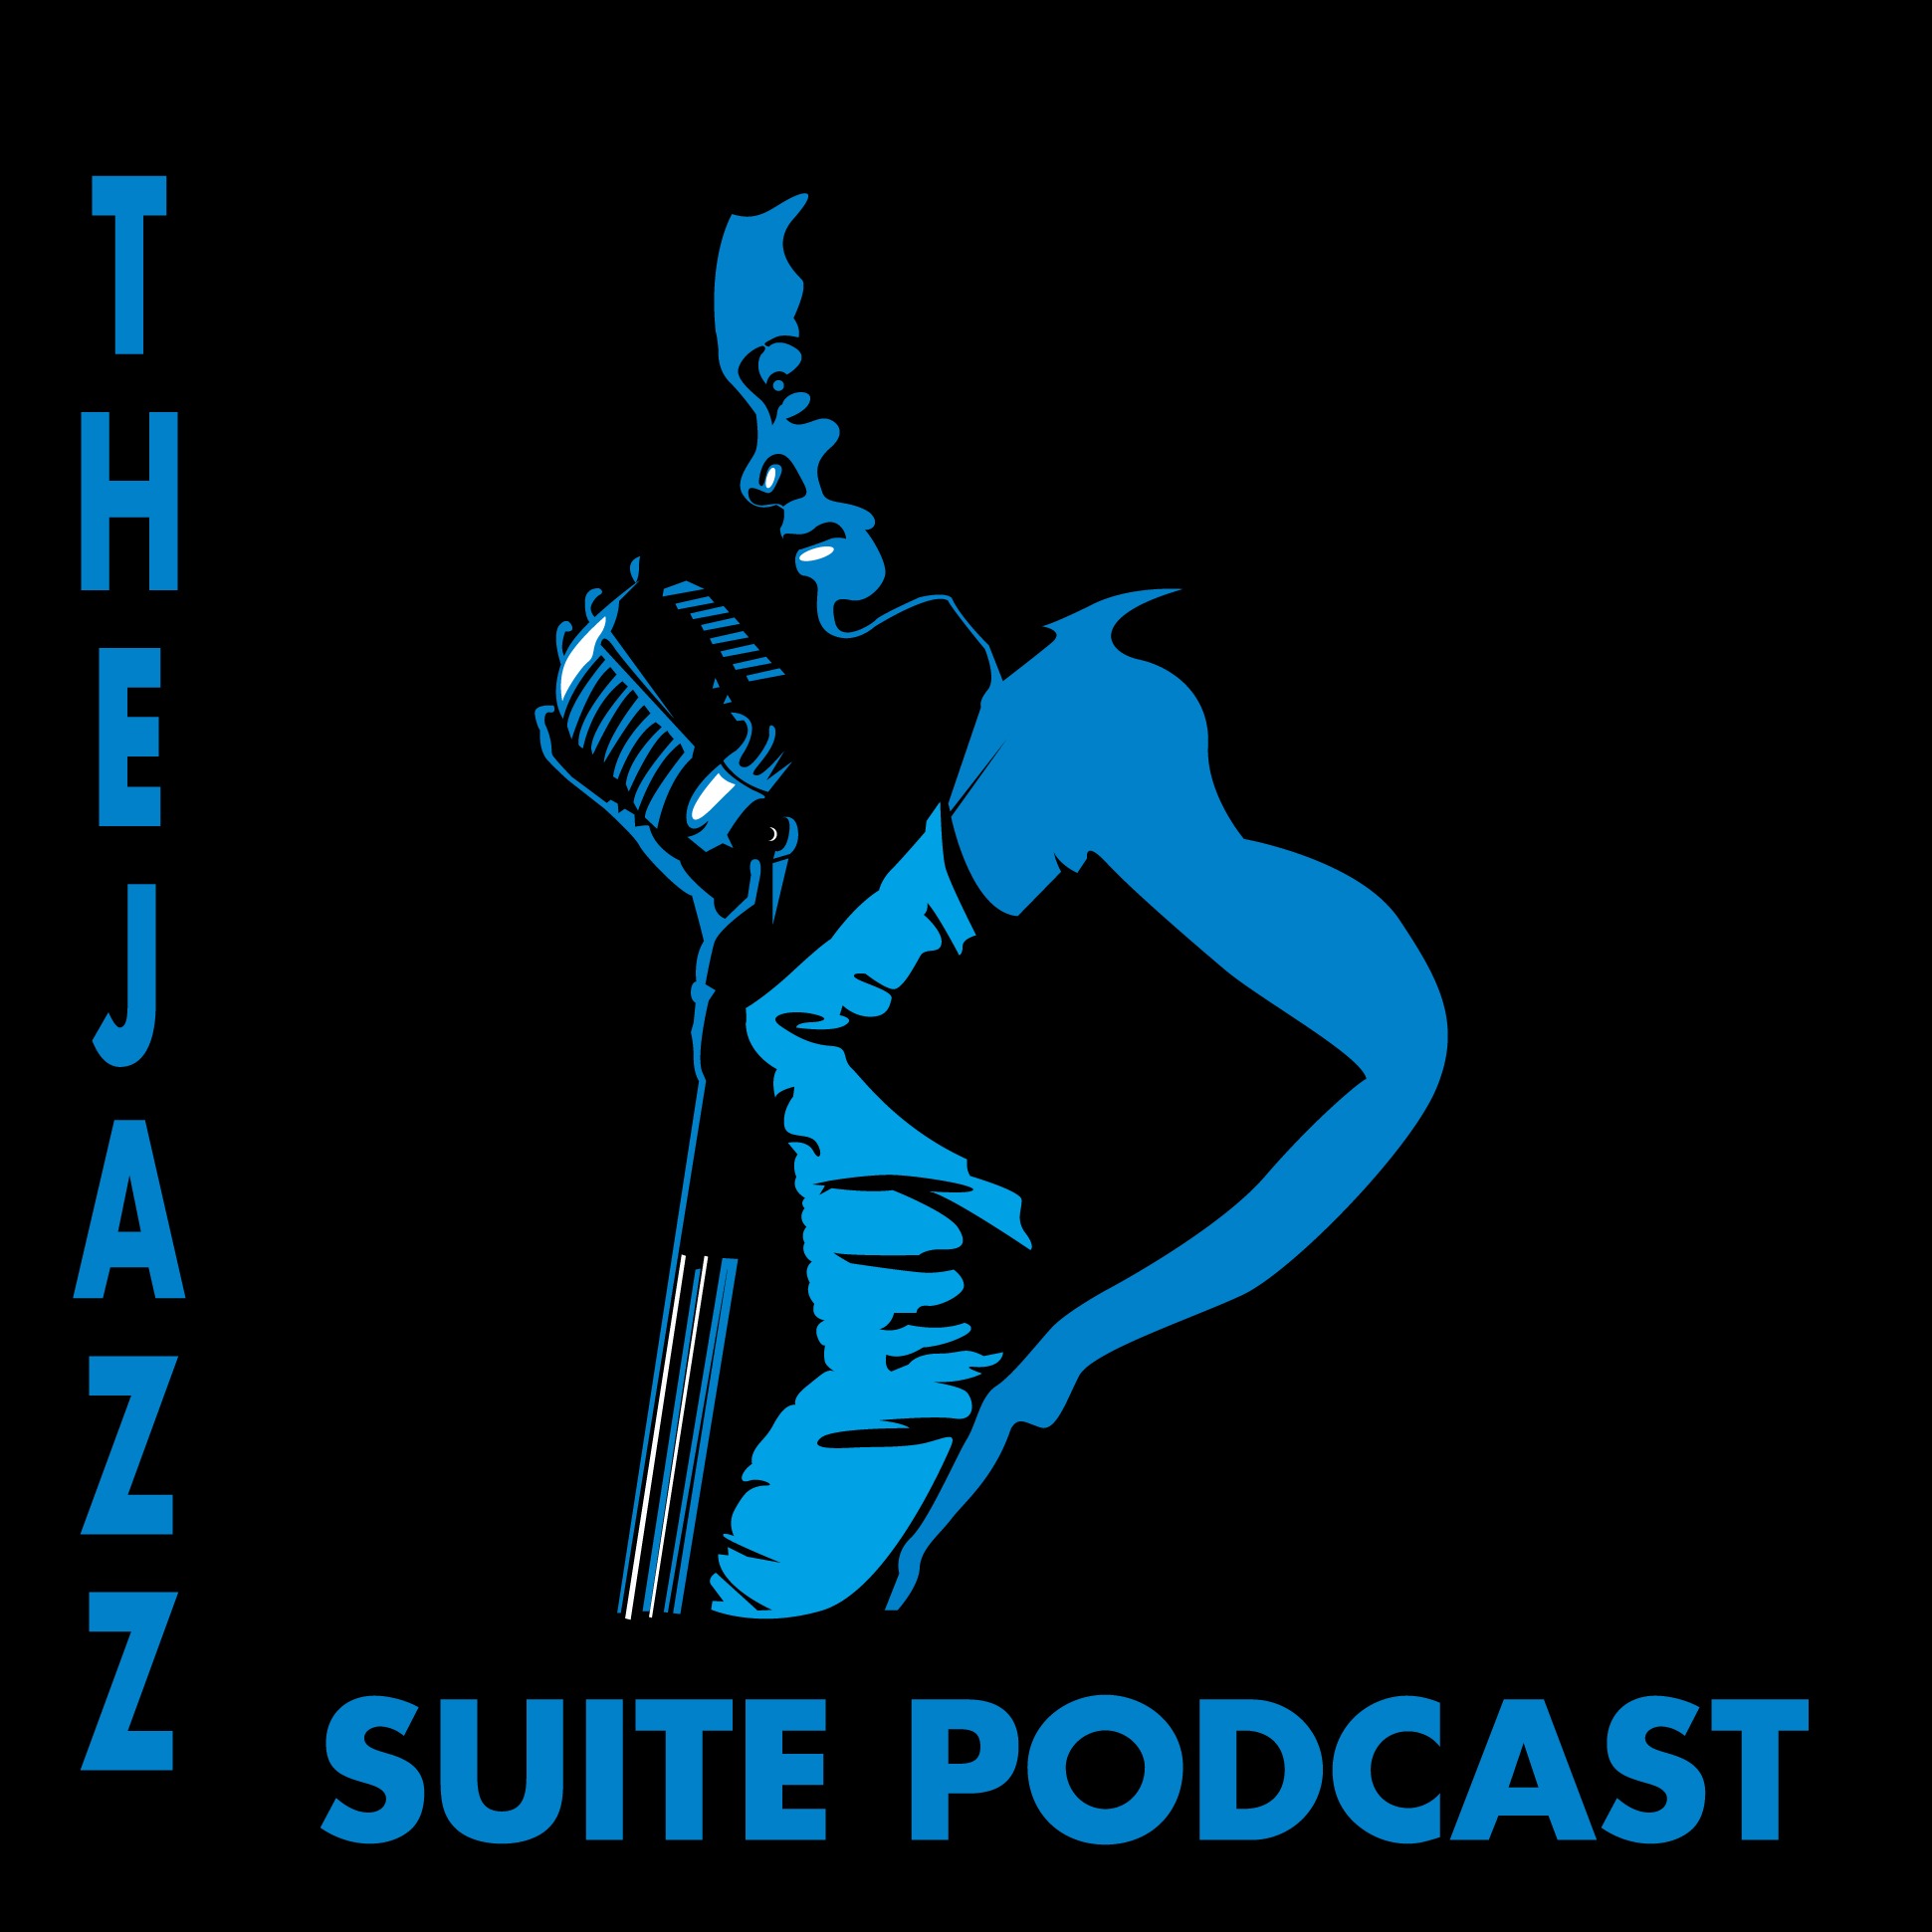 The Jazz Suite Podcast Show #465